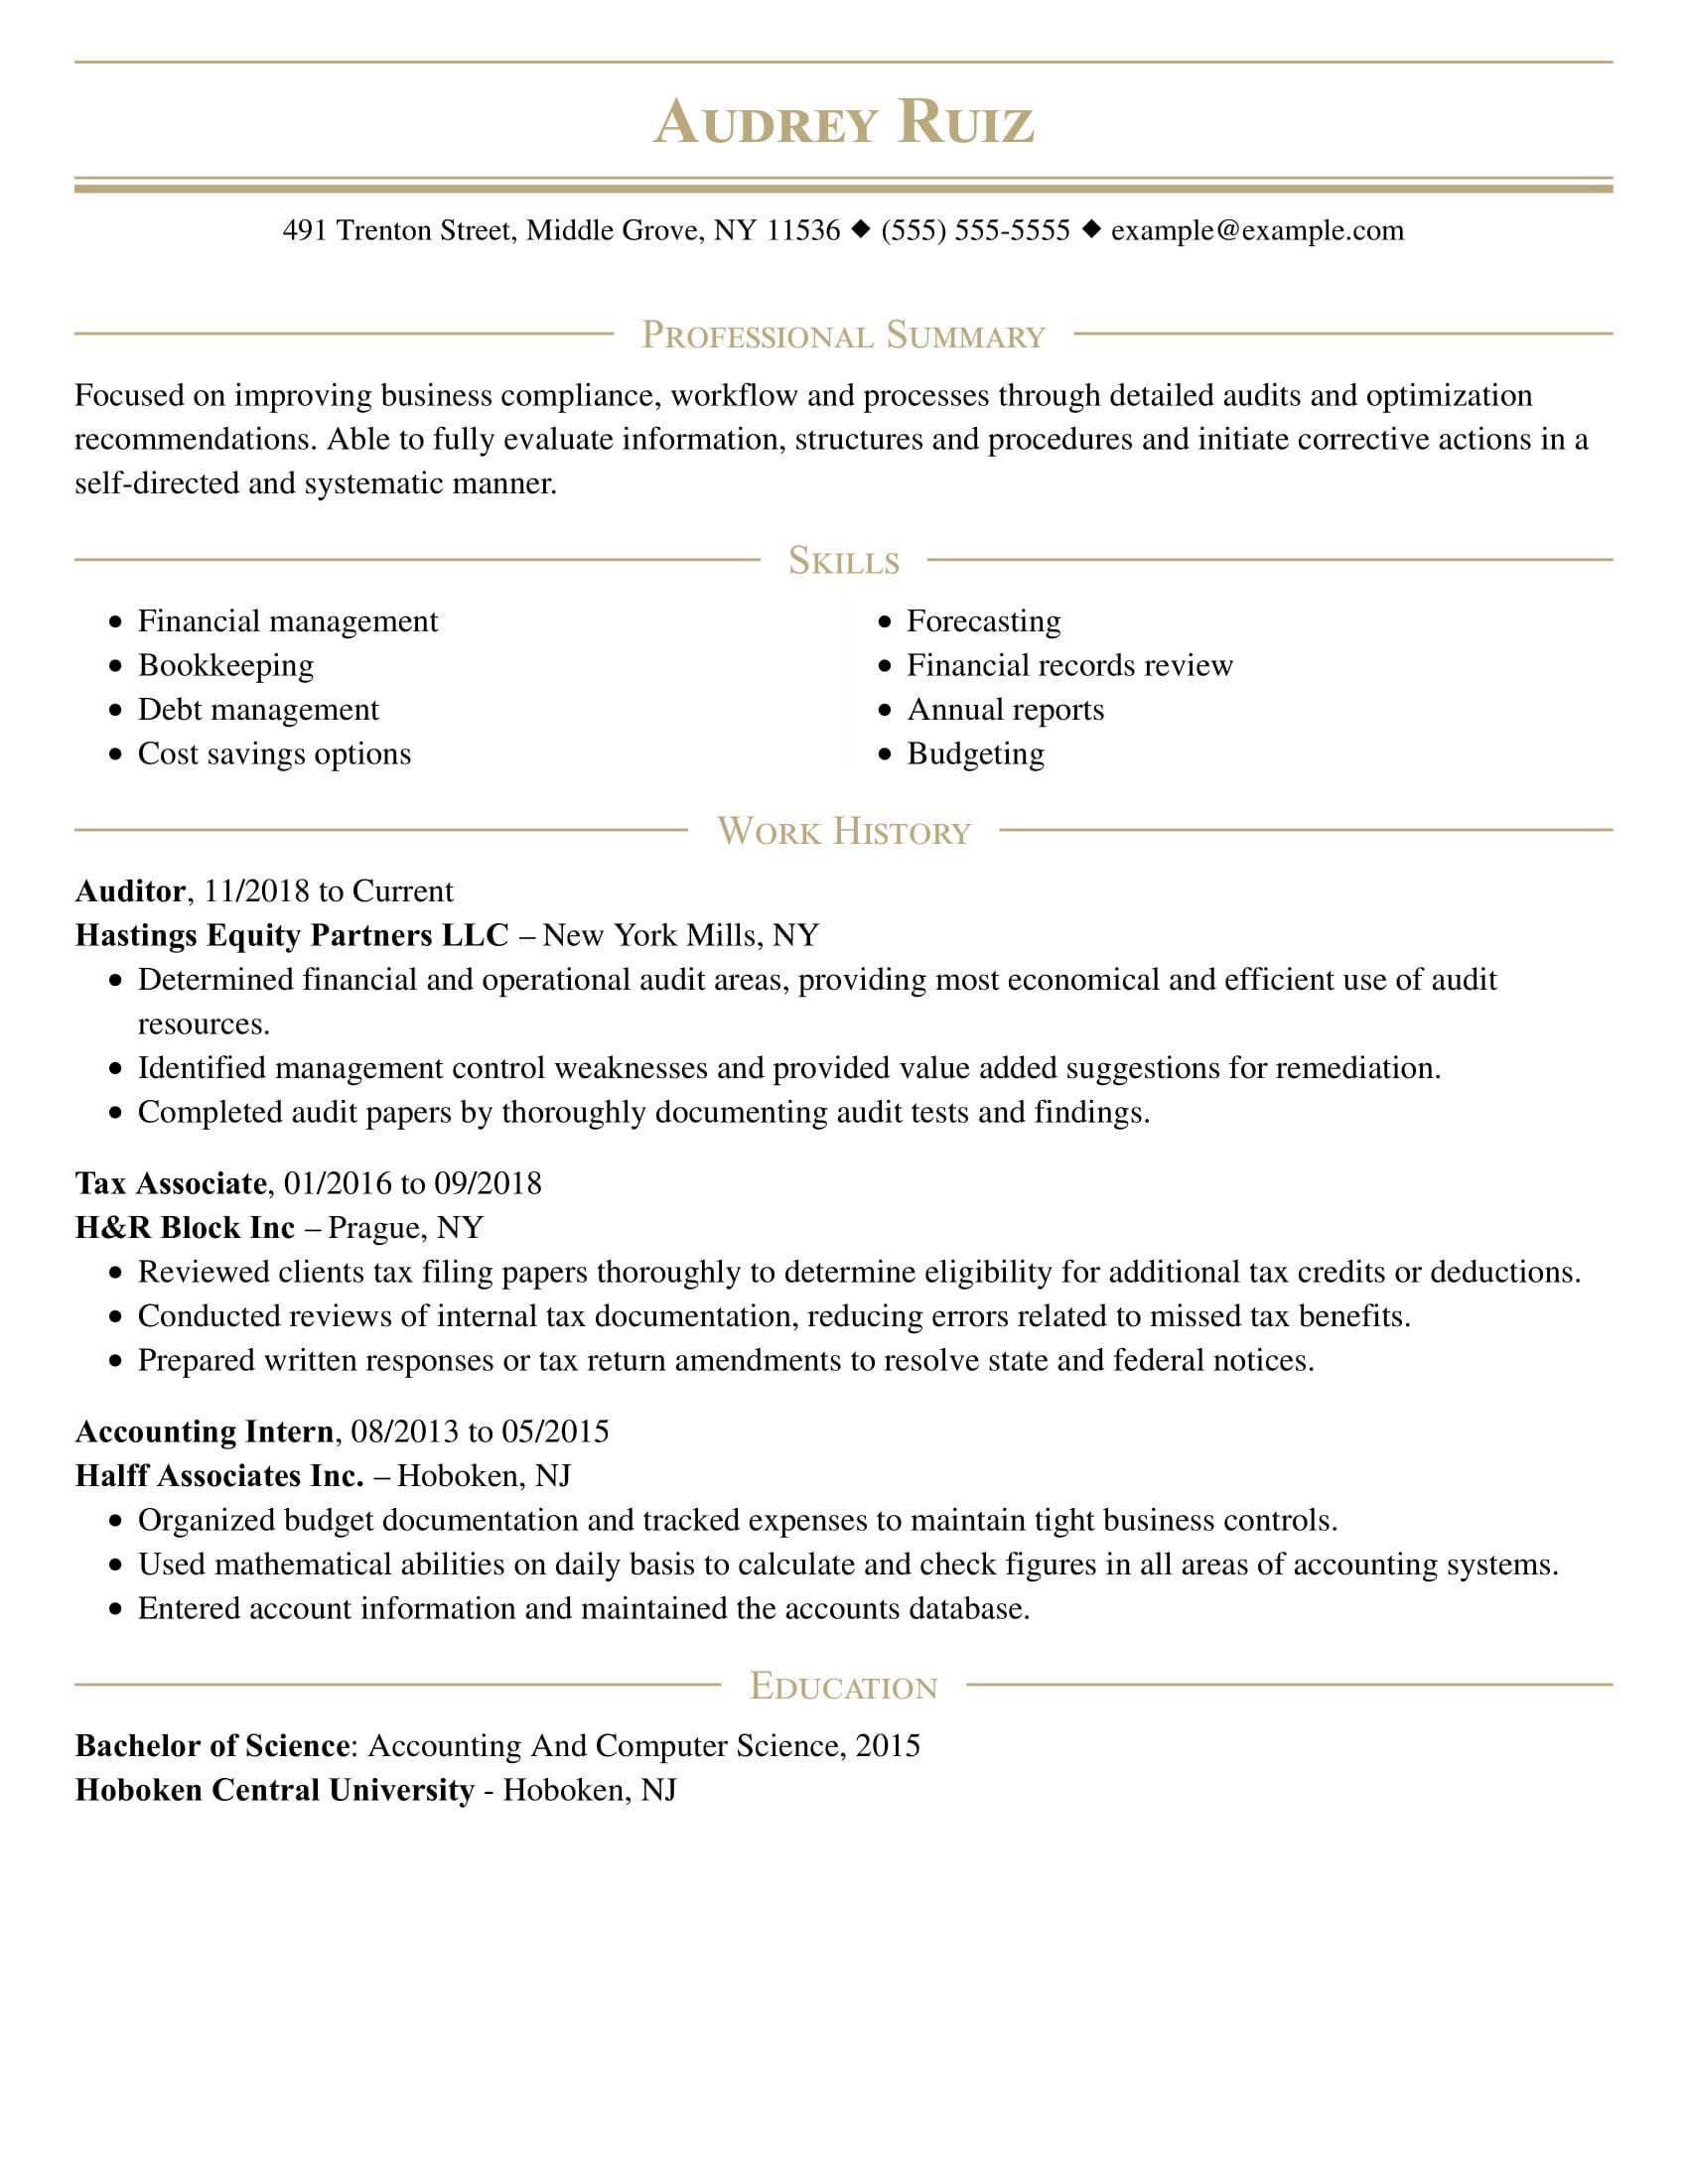 Qualified accounting intern resume template